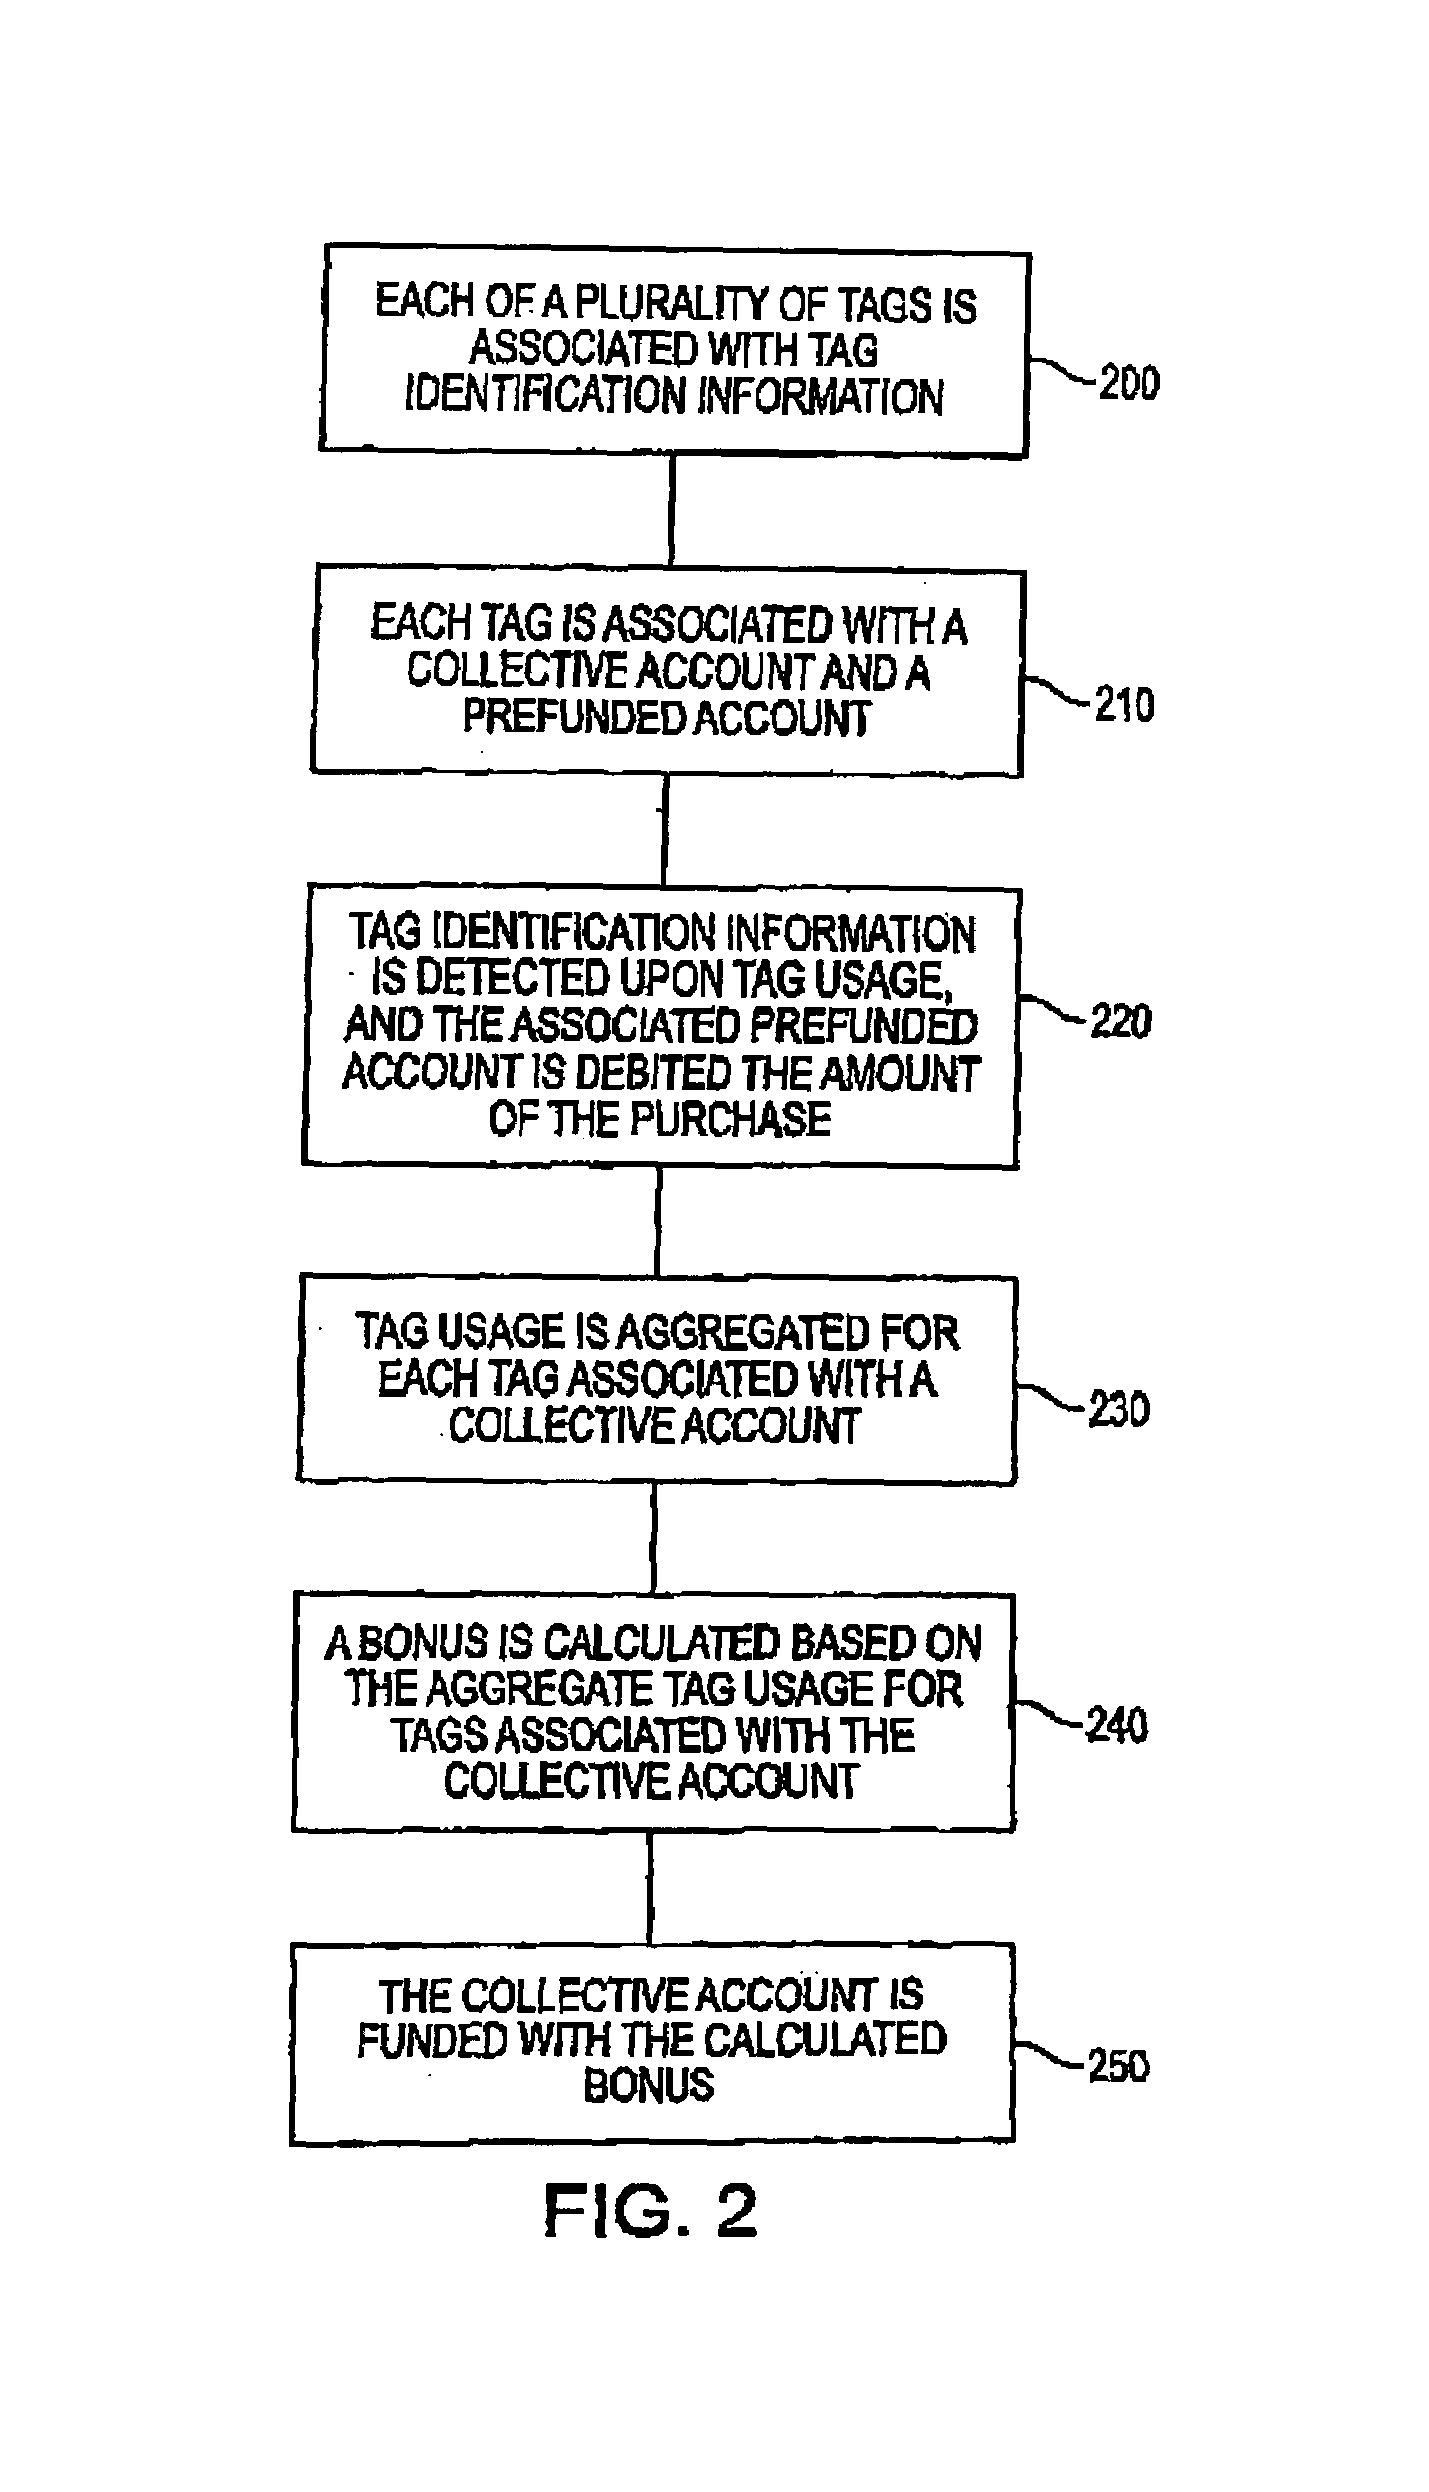 System and method for funding a collective account by use of an electronic tag